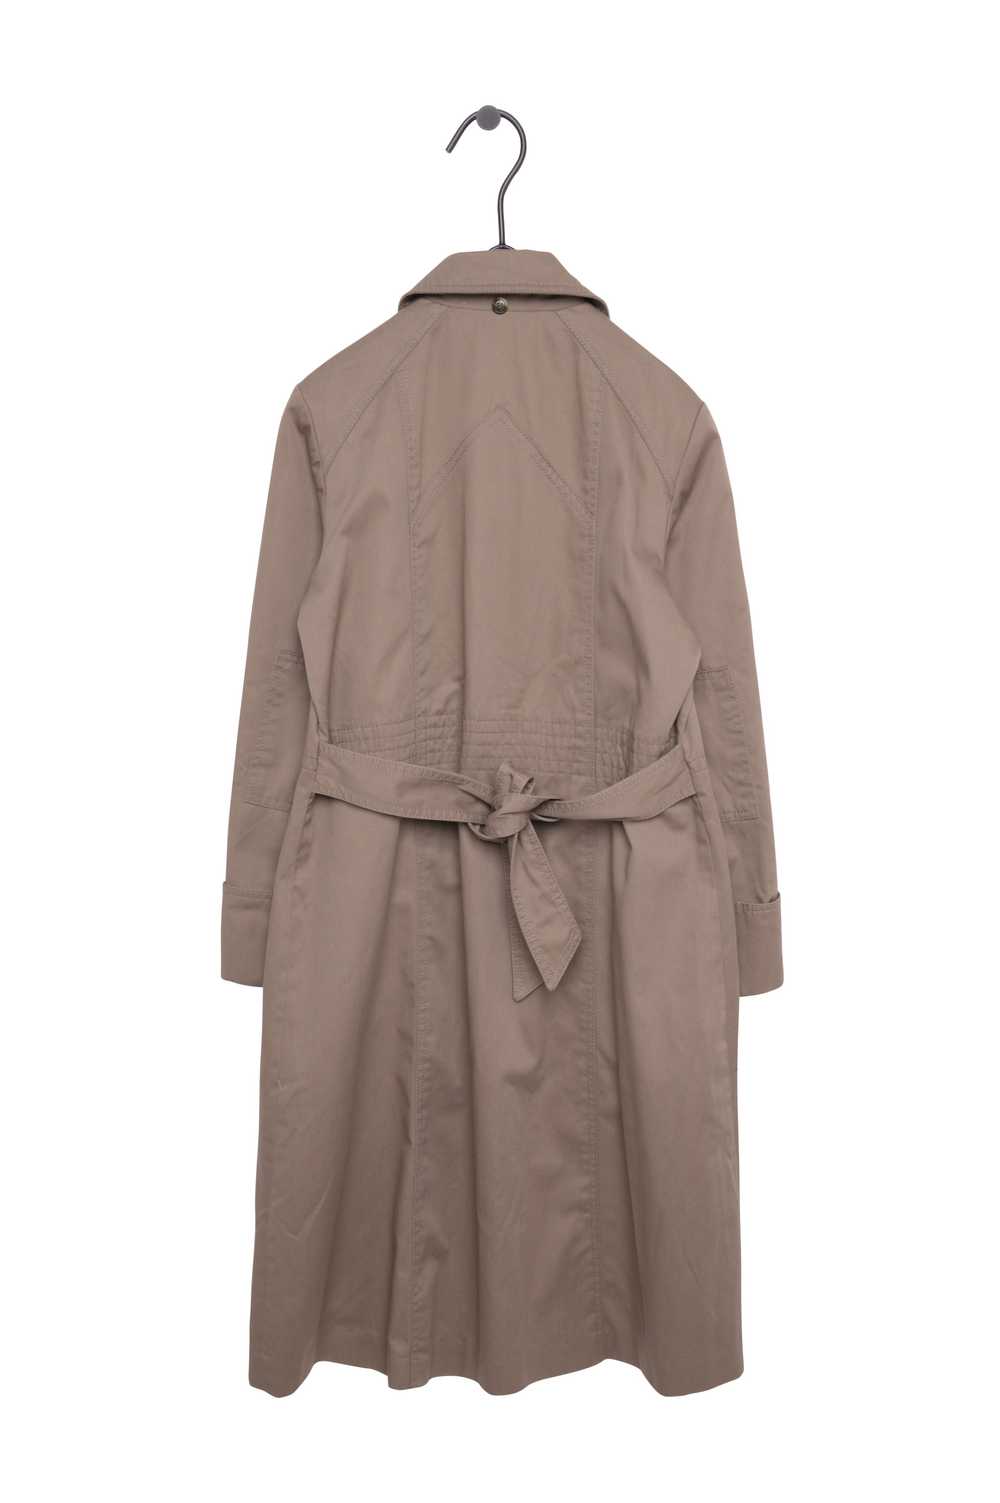 1960s Belted Trench Coat - image 2